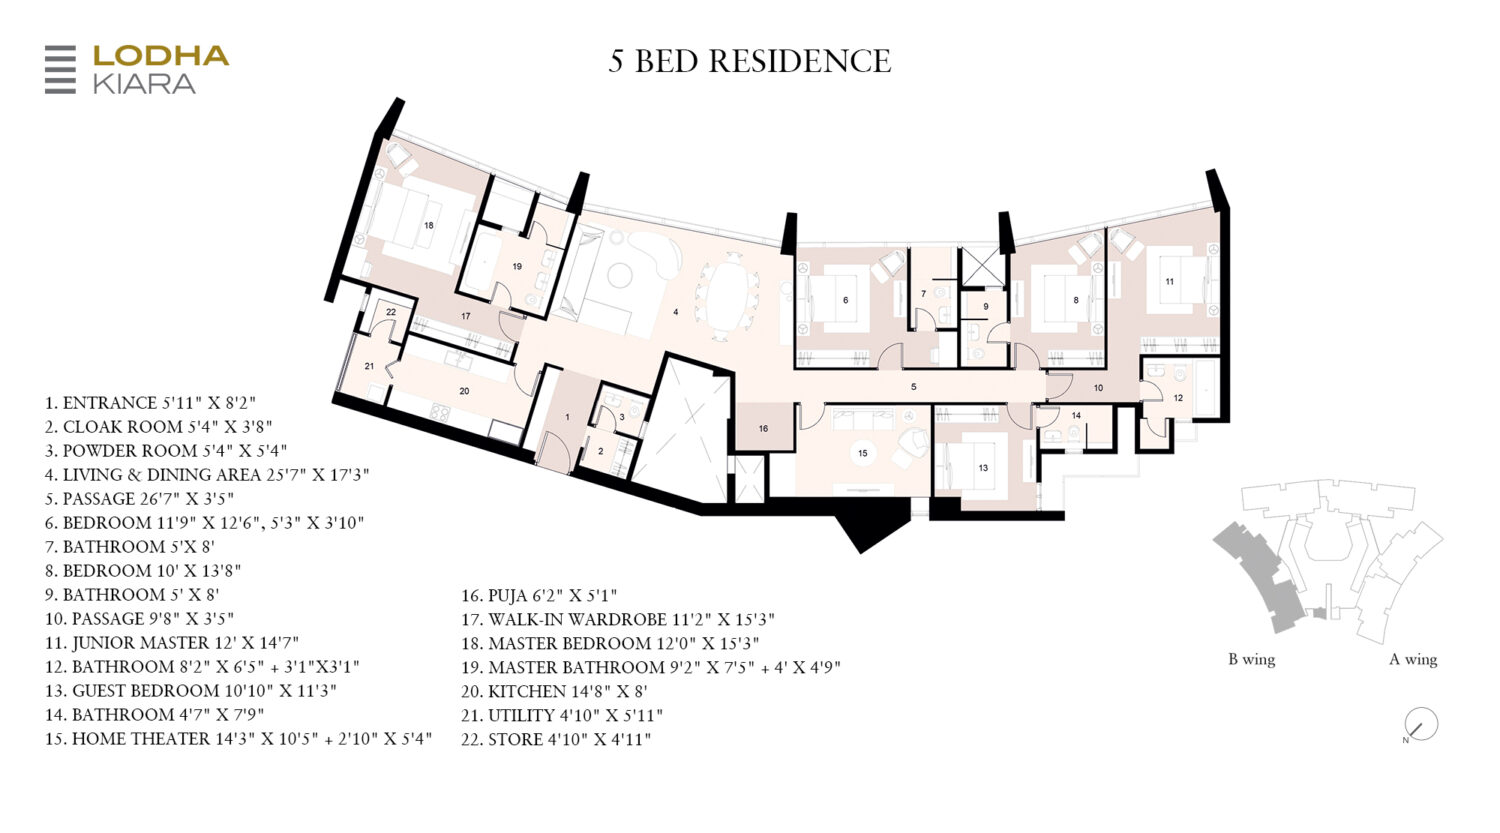 5 BED RESIDENCE